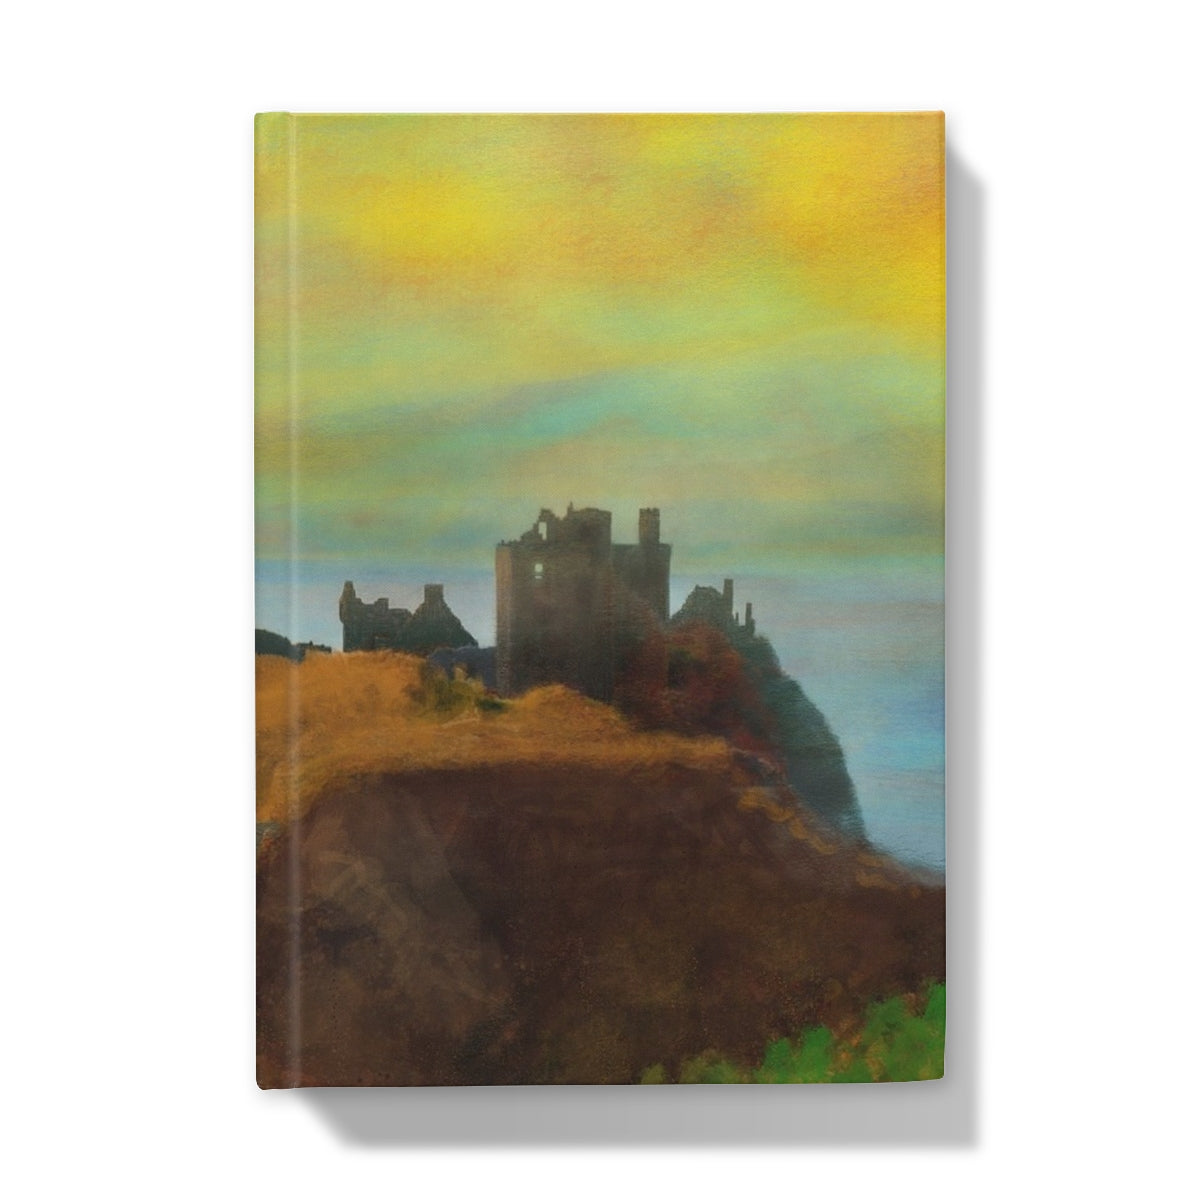 Dunnottar Castle Art Gifts Hardback Journal-Journals & Notebooks-Historic & Iconic Scotland Art Gallery-A5-Lined-Paintings, Prints, Homeware, Art Gifts From Scotland By Scottish Artist Kevin Hunter